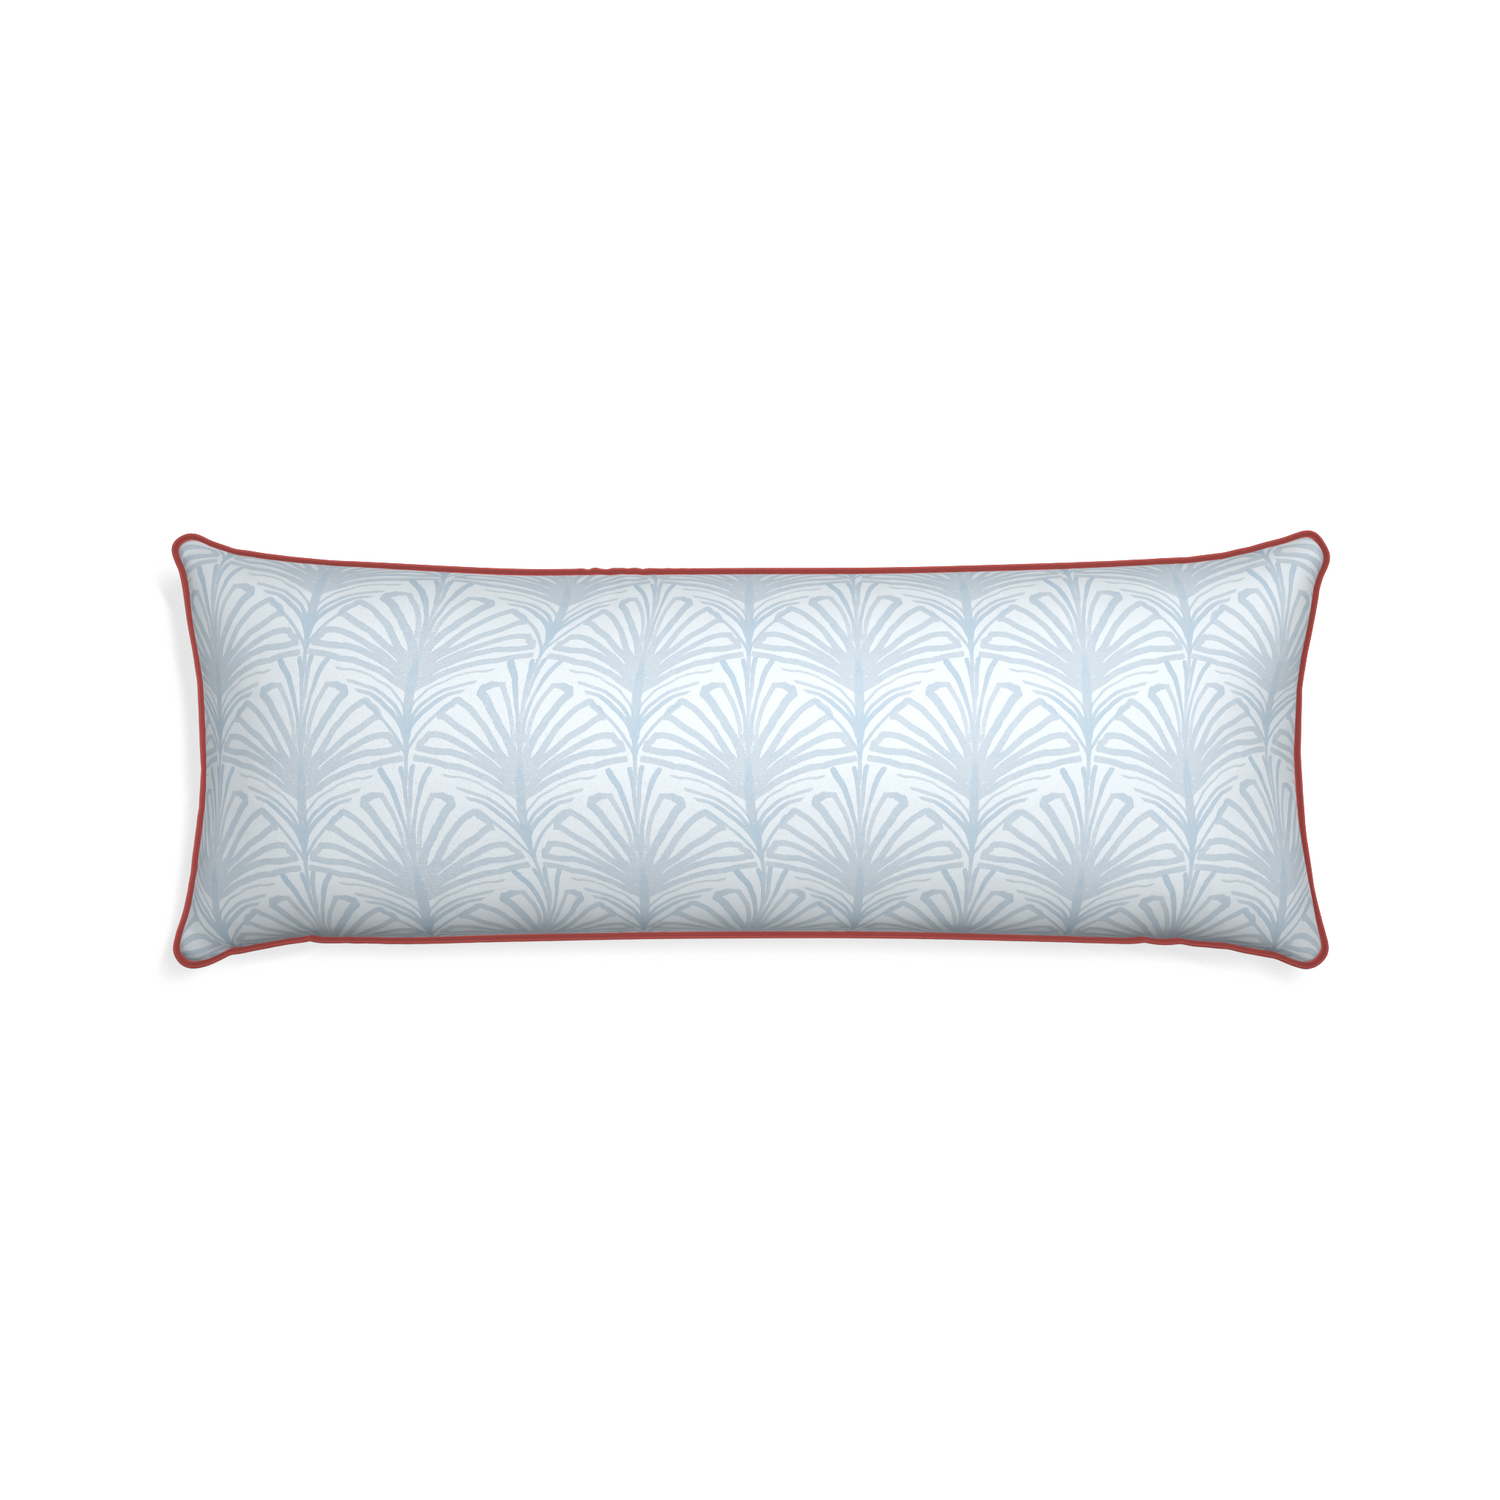 Xl-lumbar suzy sky custom pillow with c piping on white background